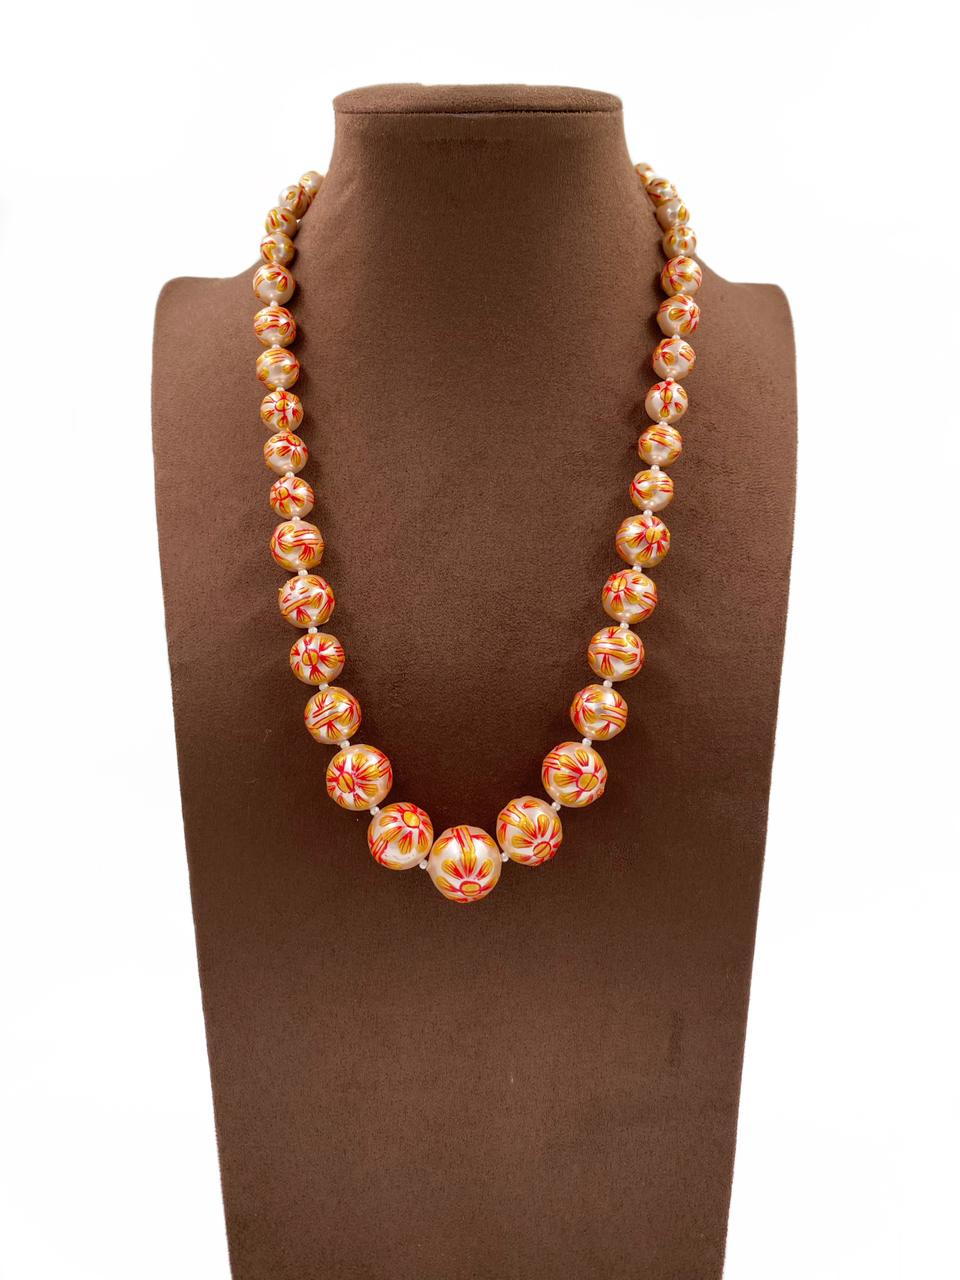 Royal Real Off White Shell Pearls Necklace For Women By Gehna Shop Beads Jewellery